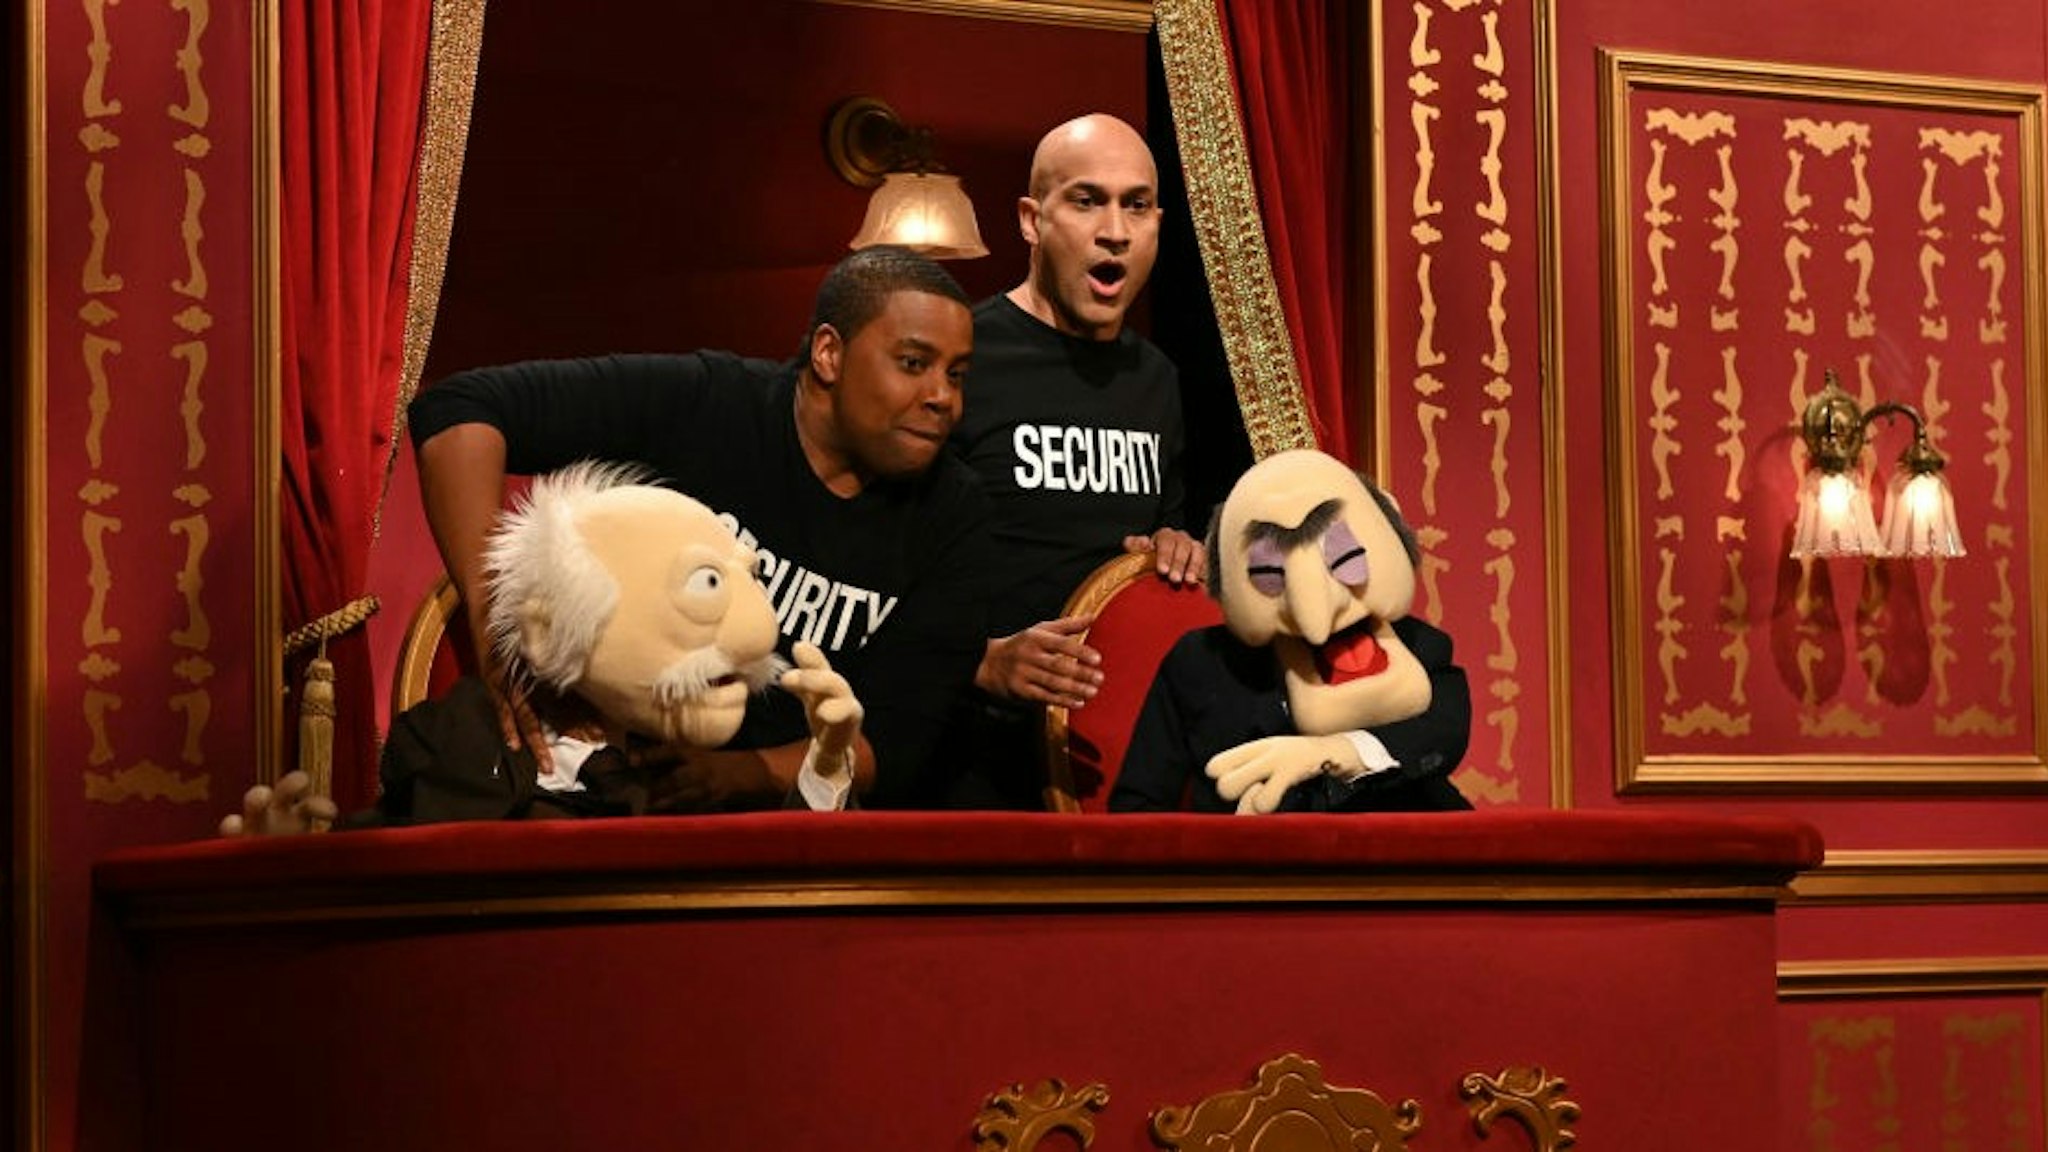 SATURDAY NIGHT LIVE -- "Keegan-Michael Key" Episode 1804 -- Pictured: (l-r) Kenan Thompson and host Keegan-Michael Key during the "Muppet Show" sketch on Saturday, May 15, 2021 -- (Photo By: